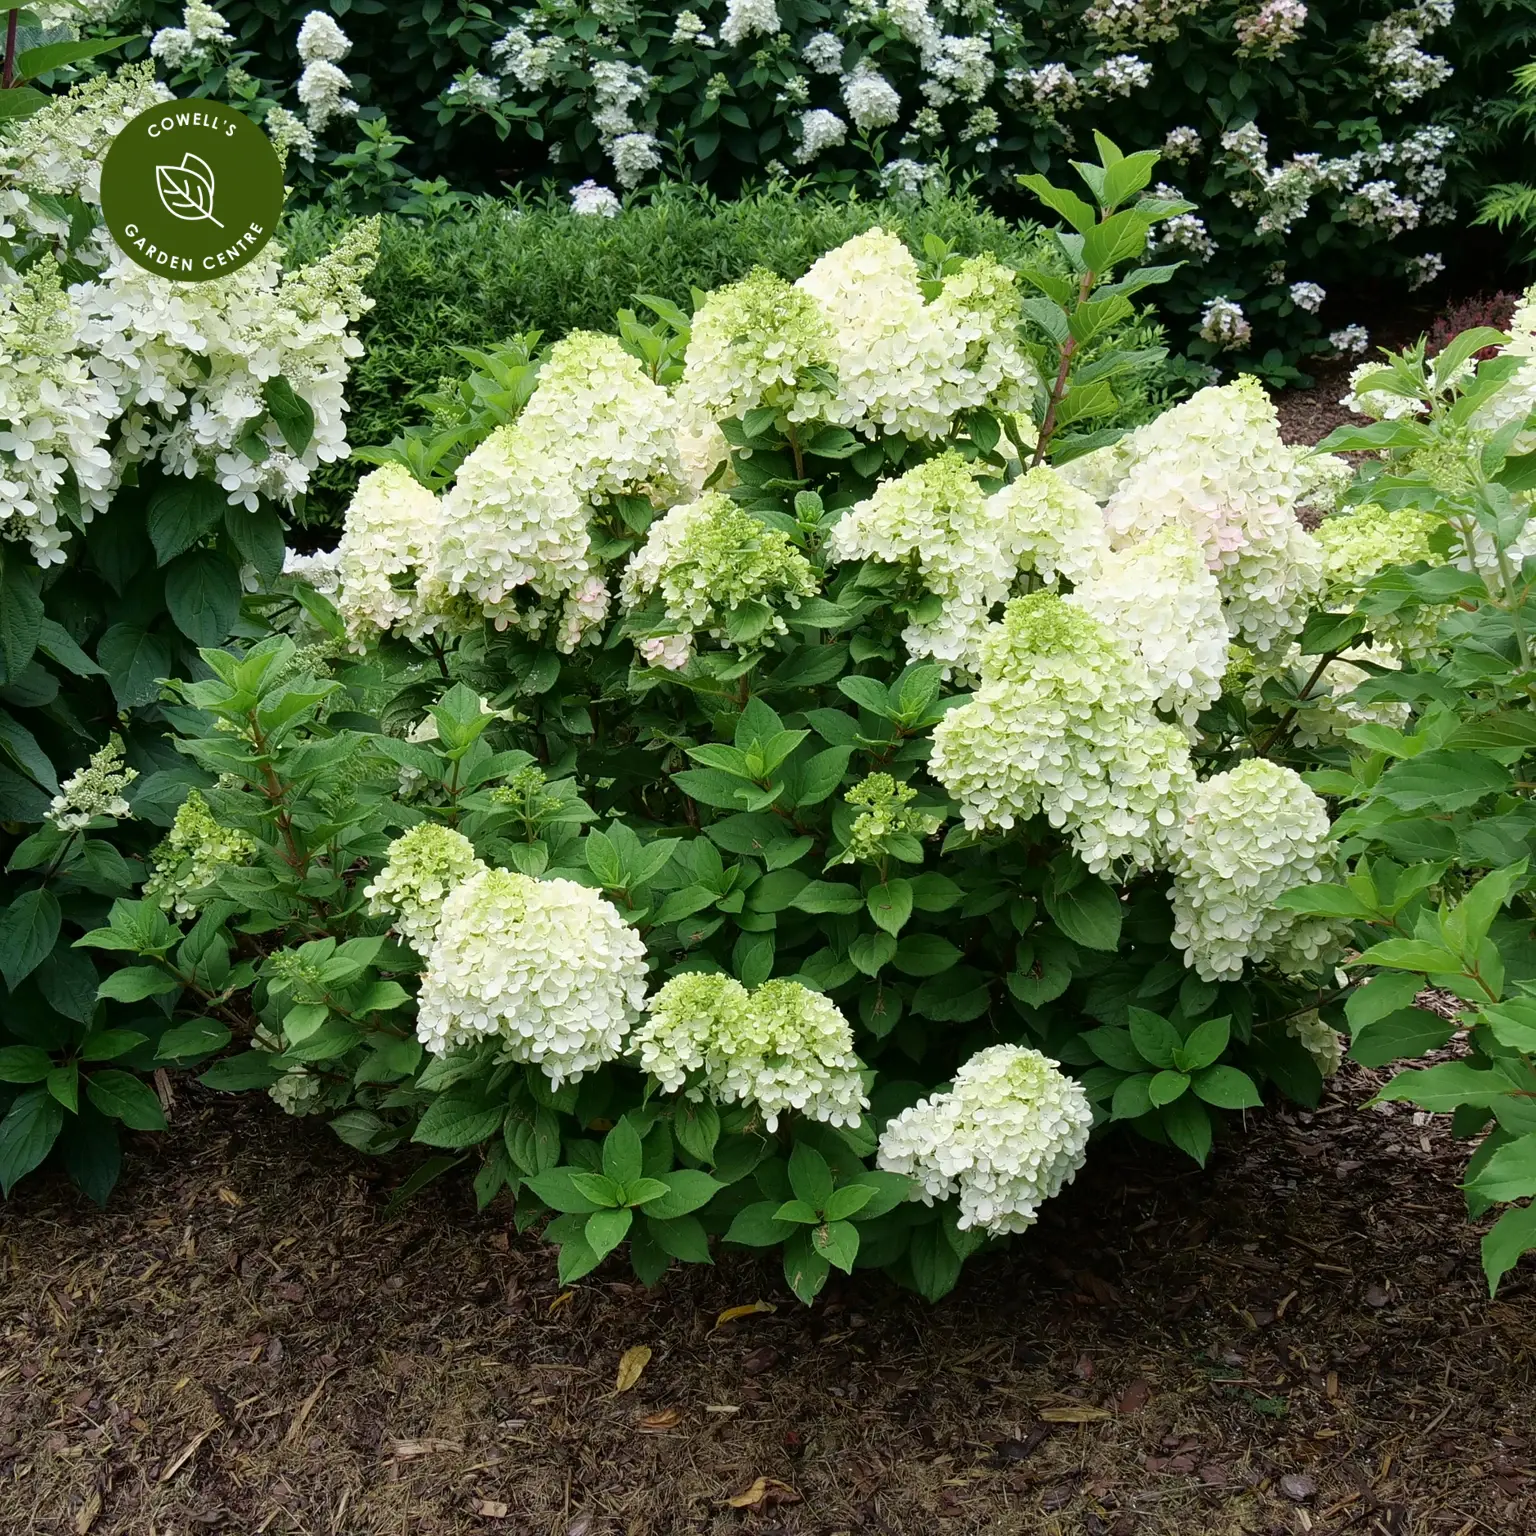 Image of Hydrangea paniculata little lime plant in vase